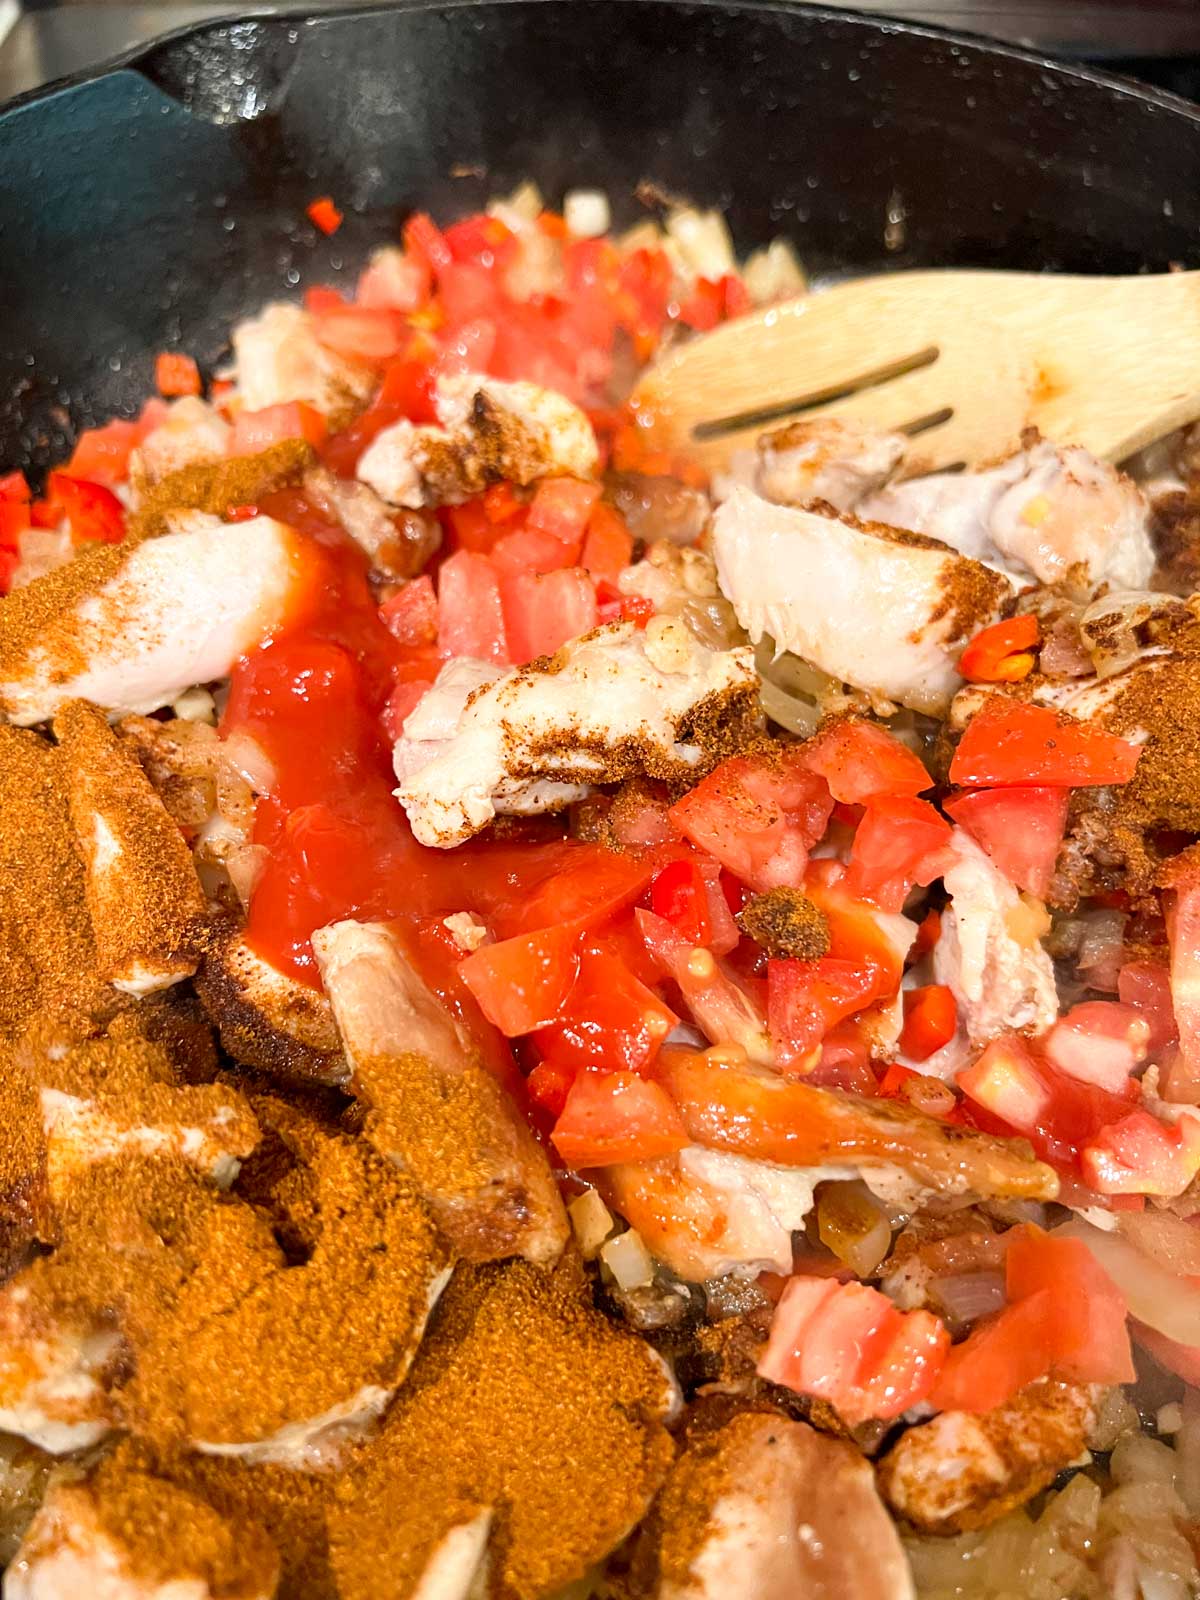 Browned chicken thigh pieces, onions, paprika, diced tomatoes and red peppers in a Dutch Oven